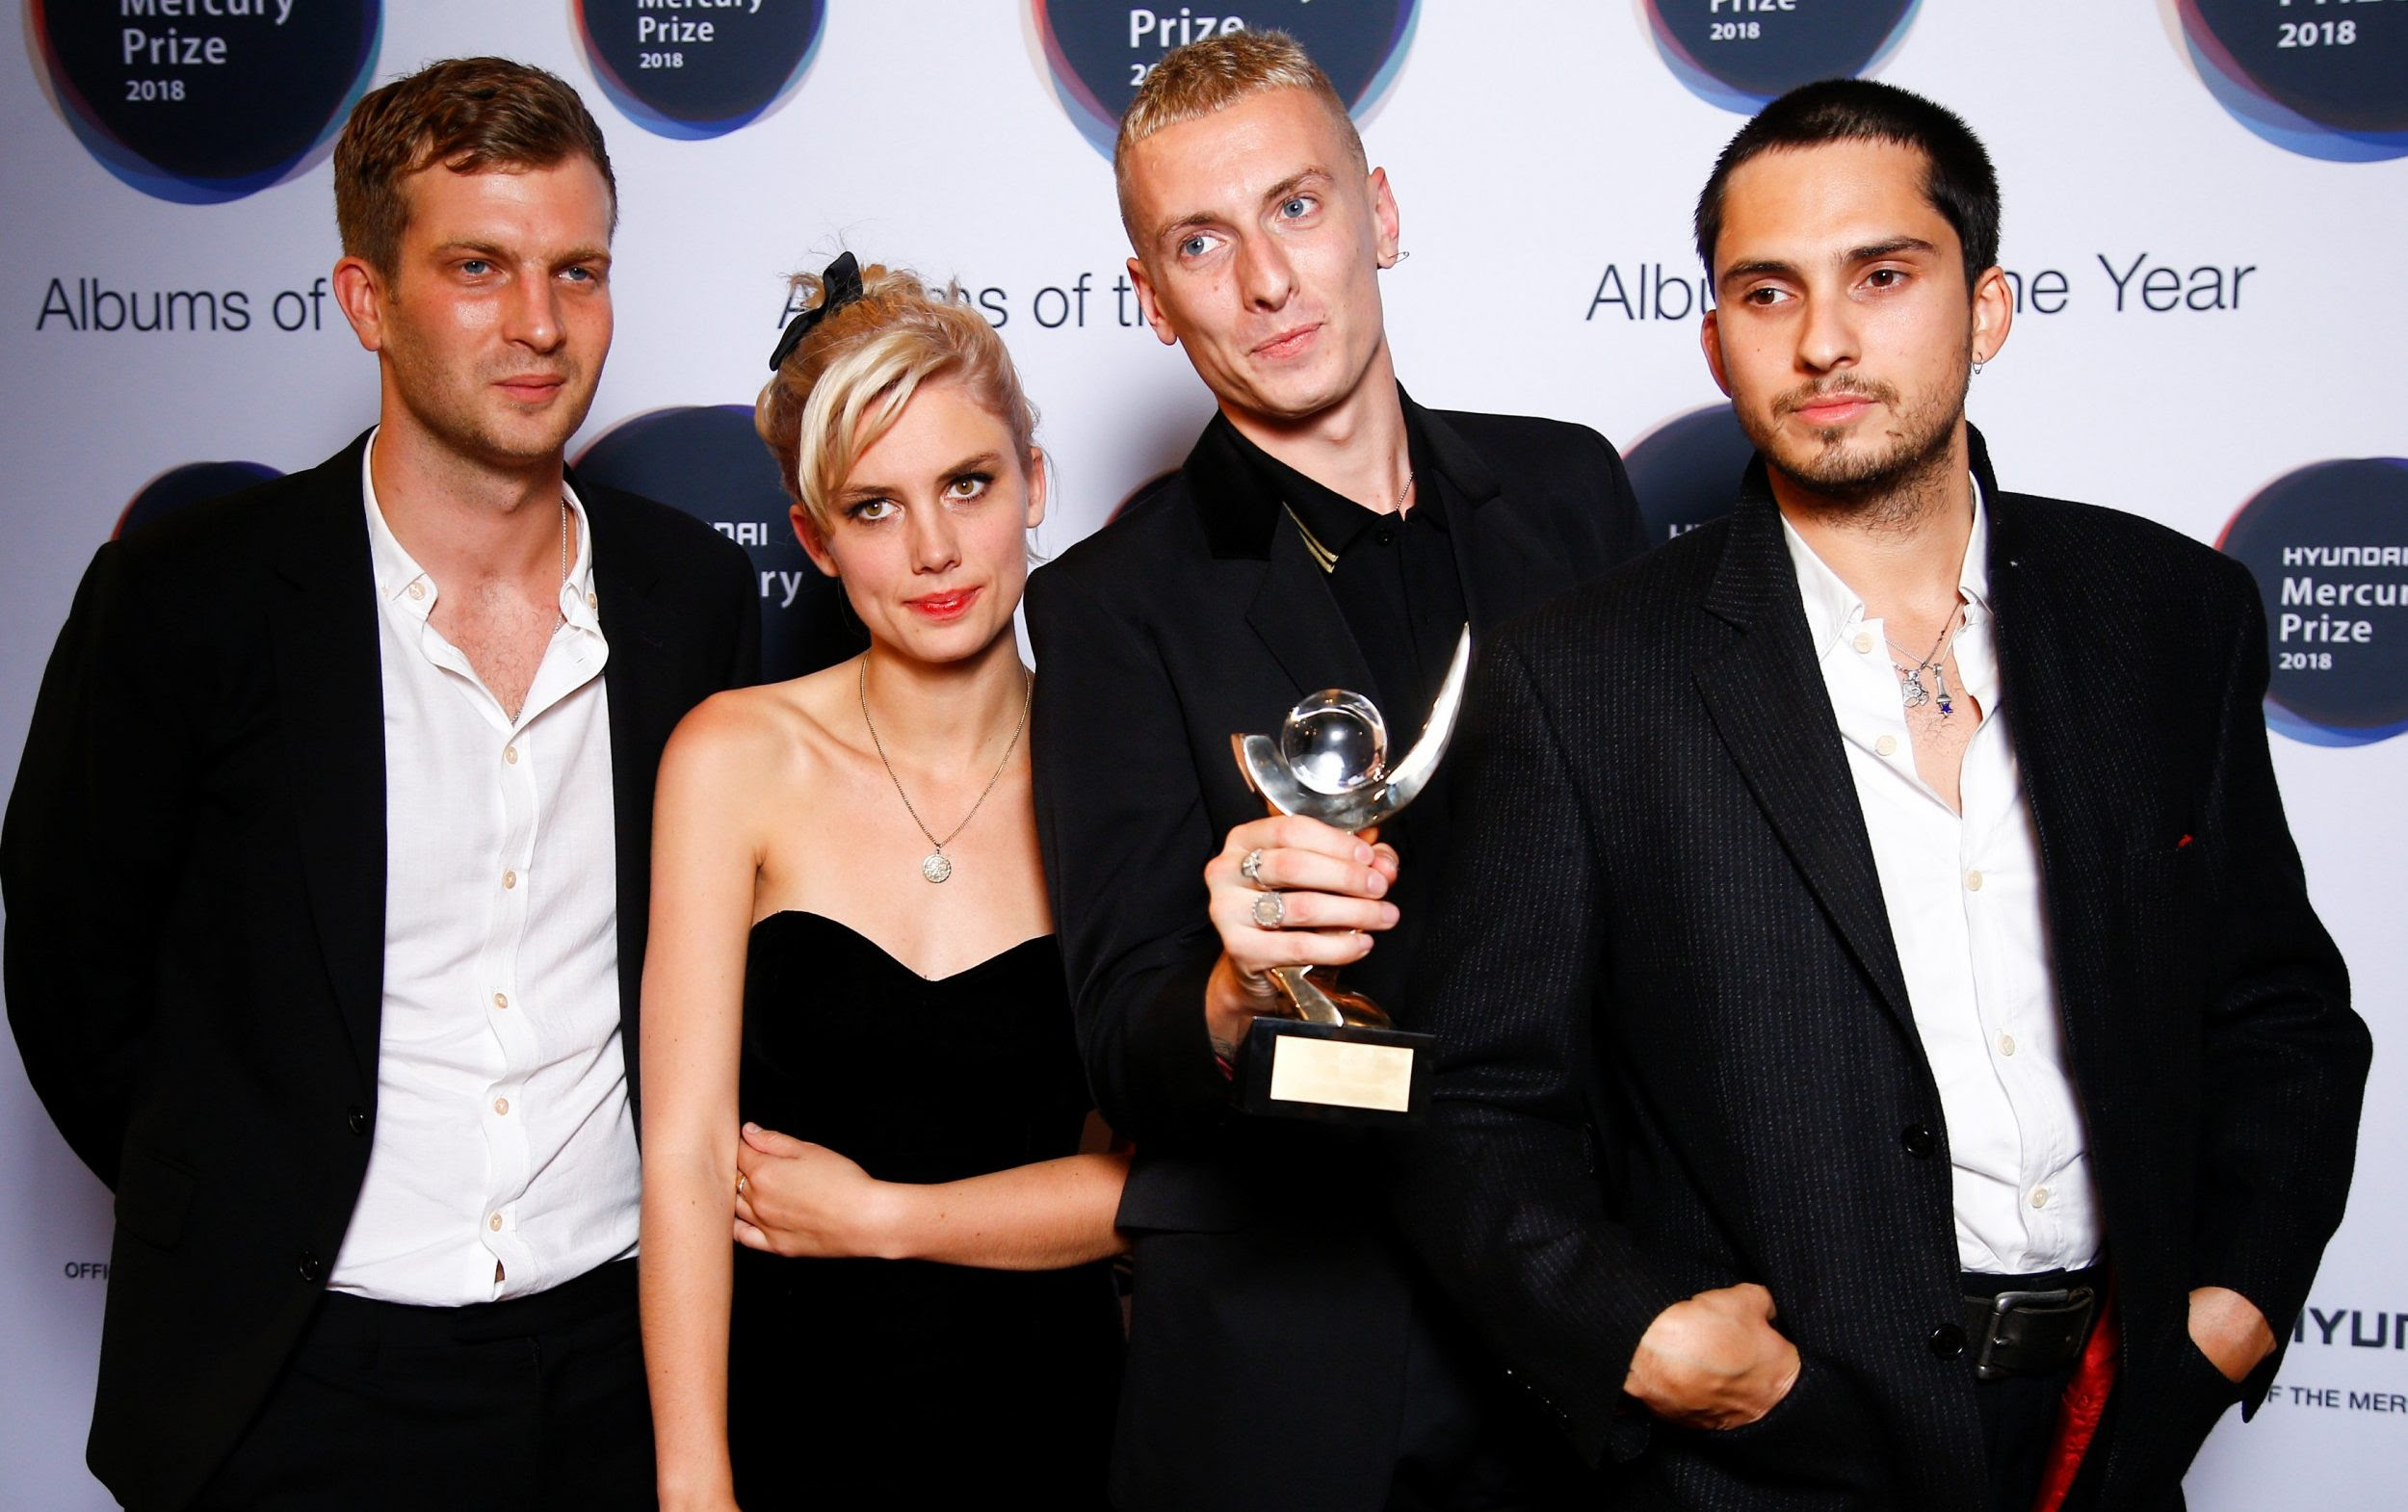 'We need to get to Glastonbury, not joking': Wolf Alice's plea as BA flight cancelled